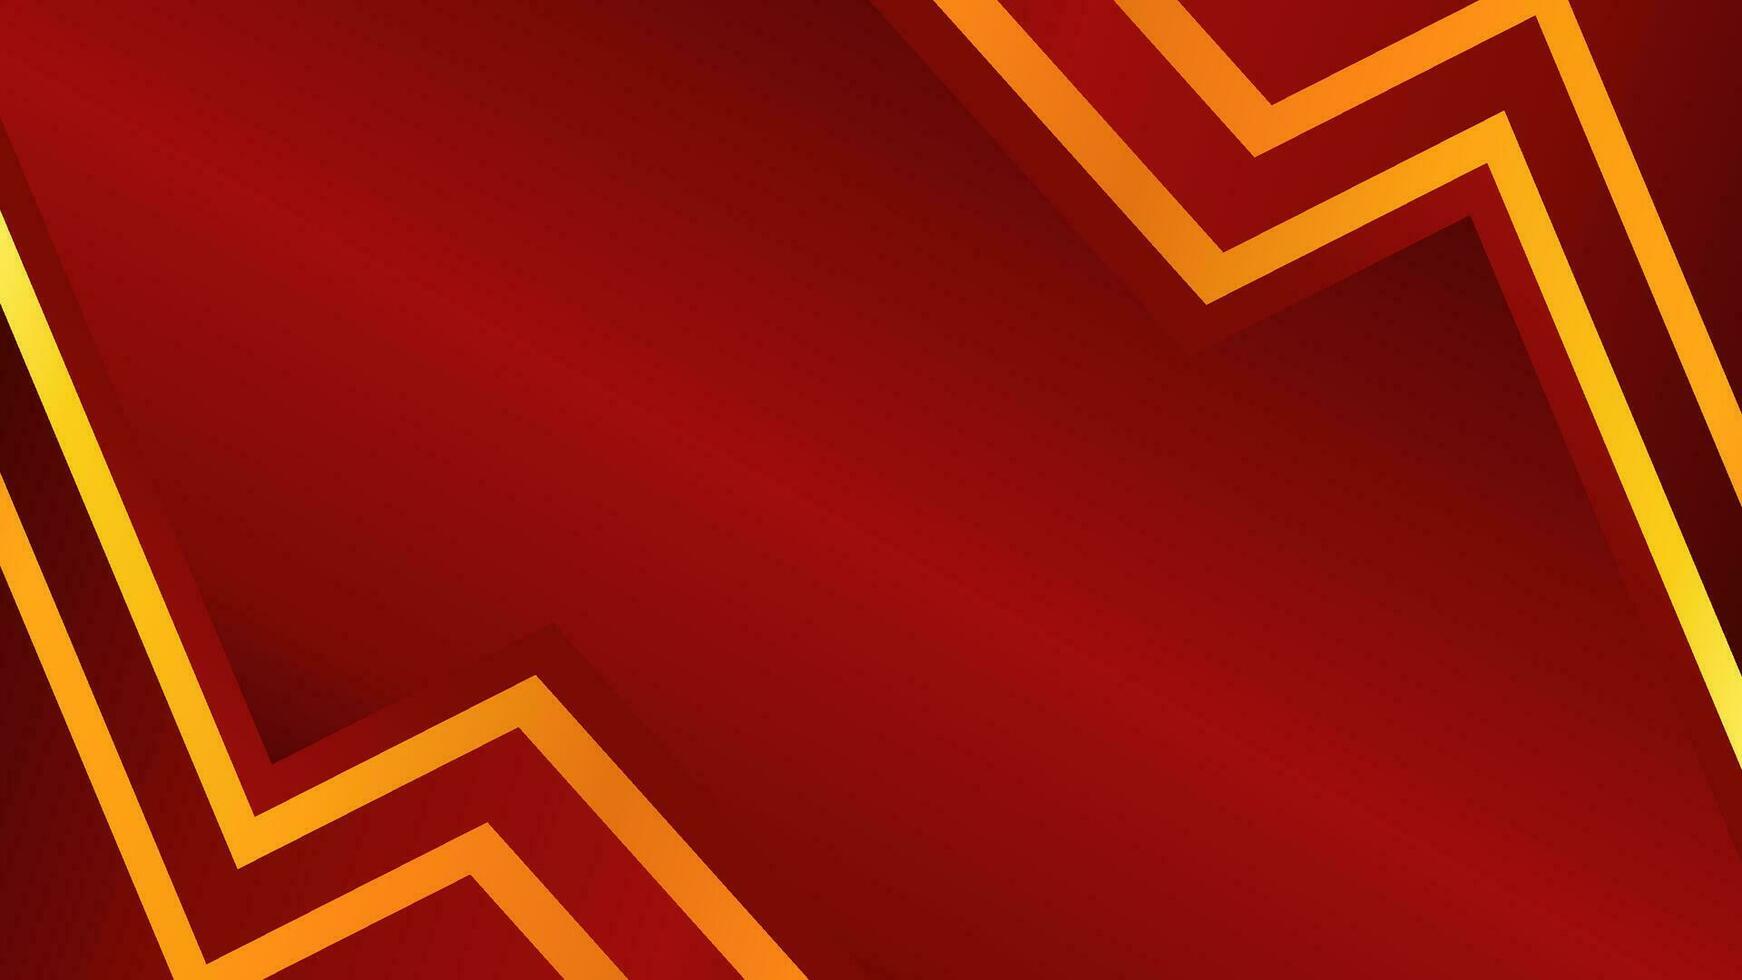 abstract 3d goud rood lint Aan rood achtergrond. rood luxe achtergrond met gouden lijn. luxe achtergrond met gouden lijn decoratie. vector